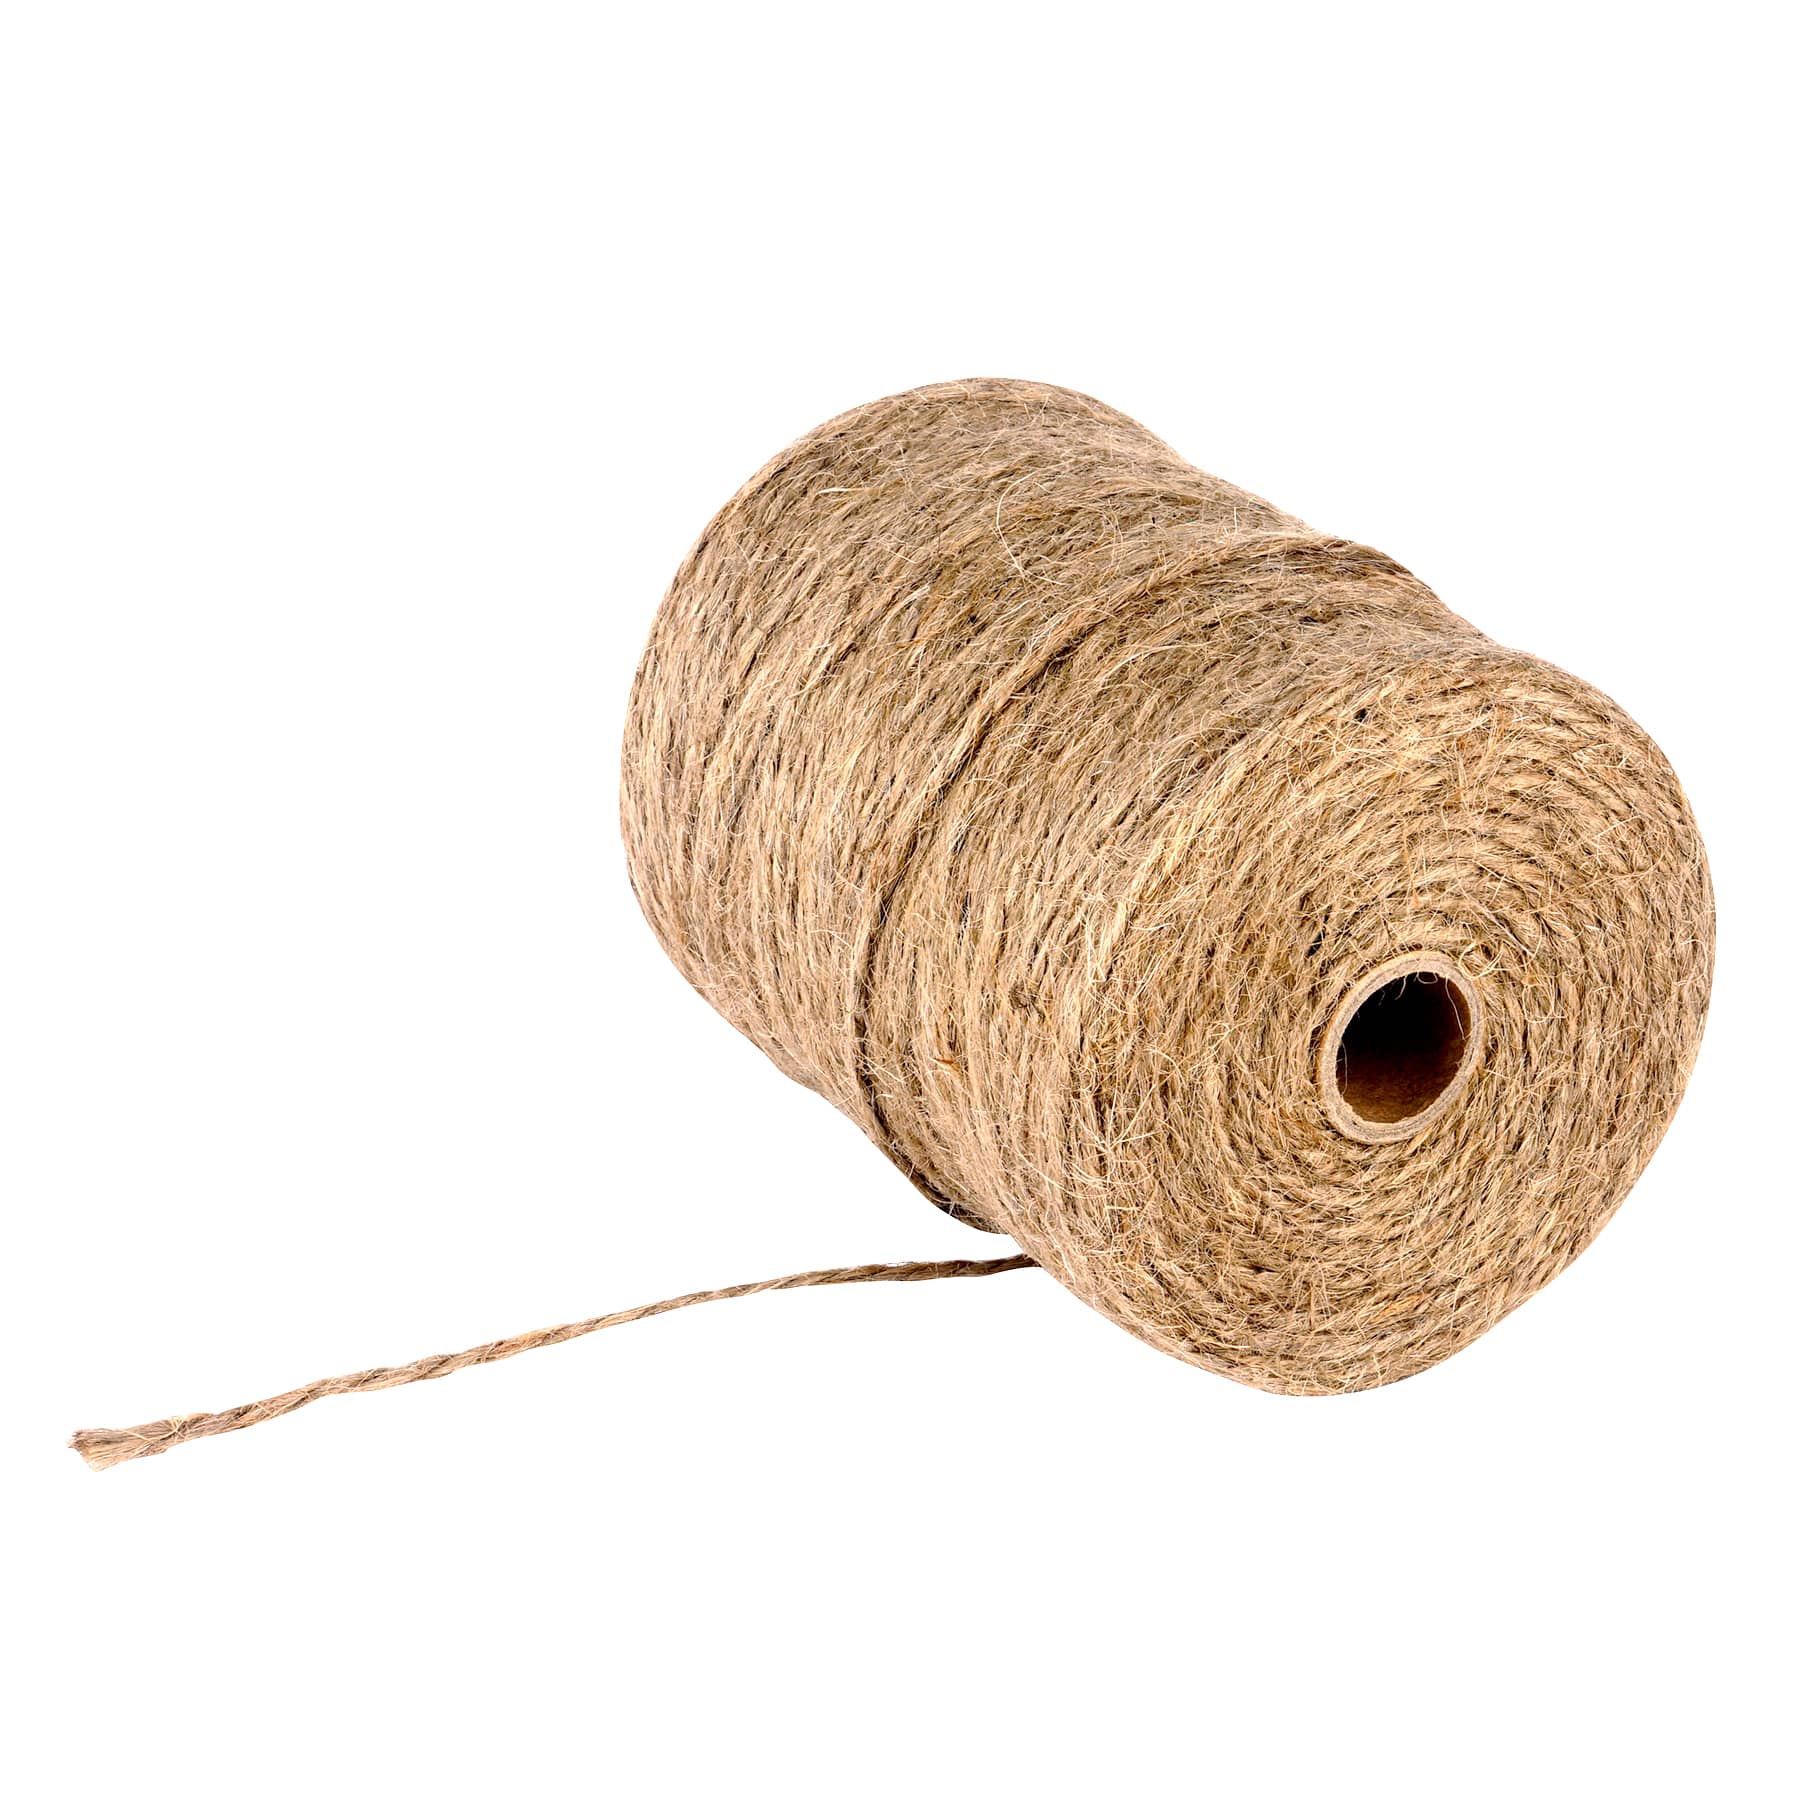 Shop for the Natural Jute Twine By Ashland™ at Michaels